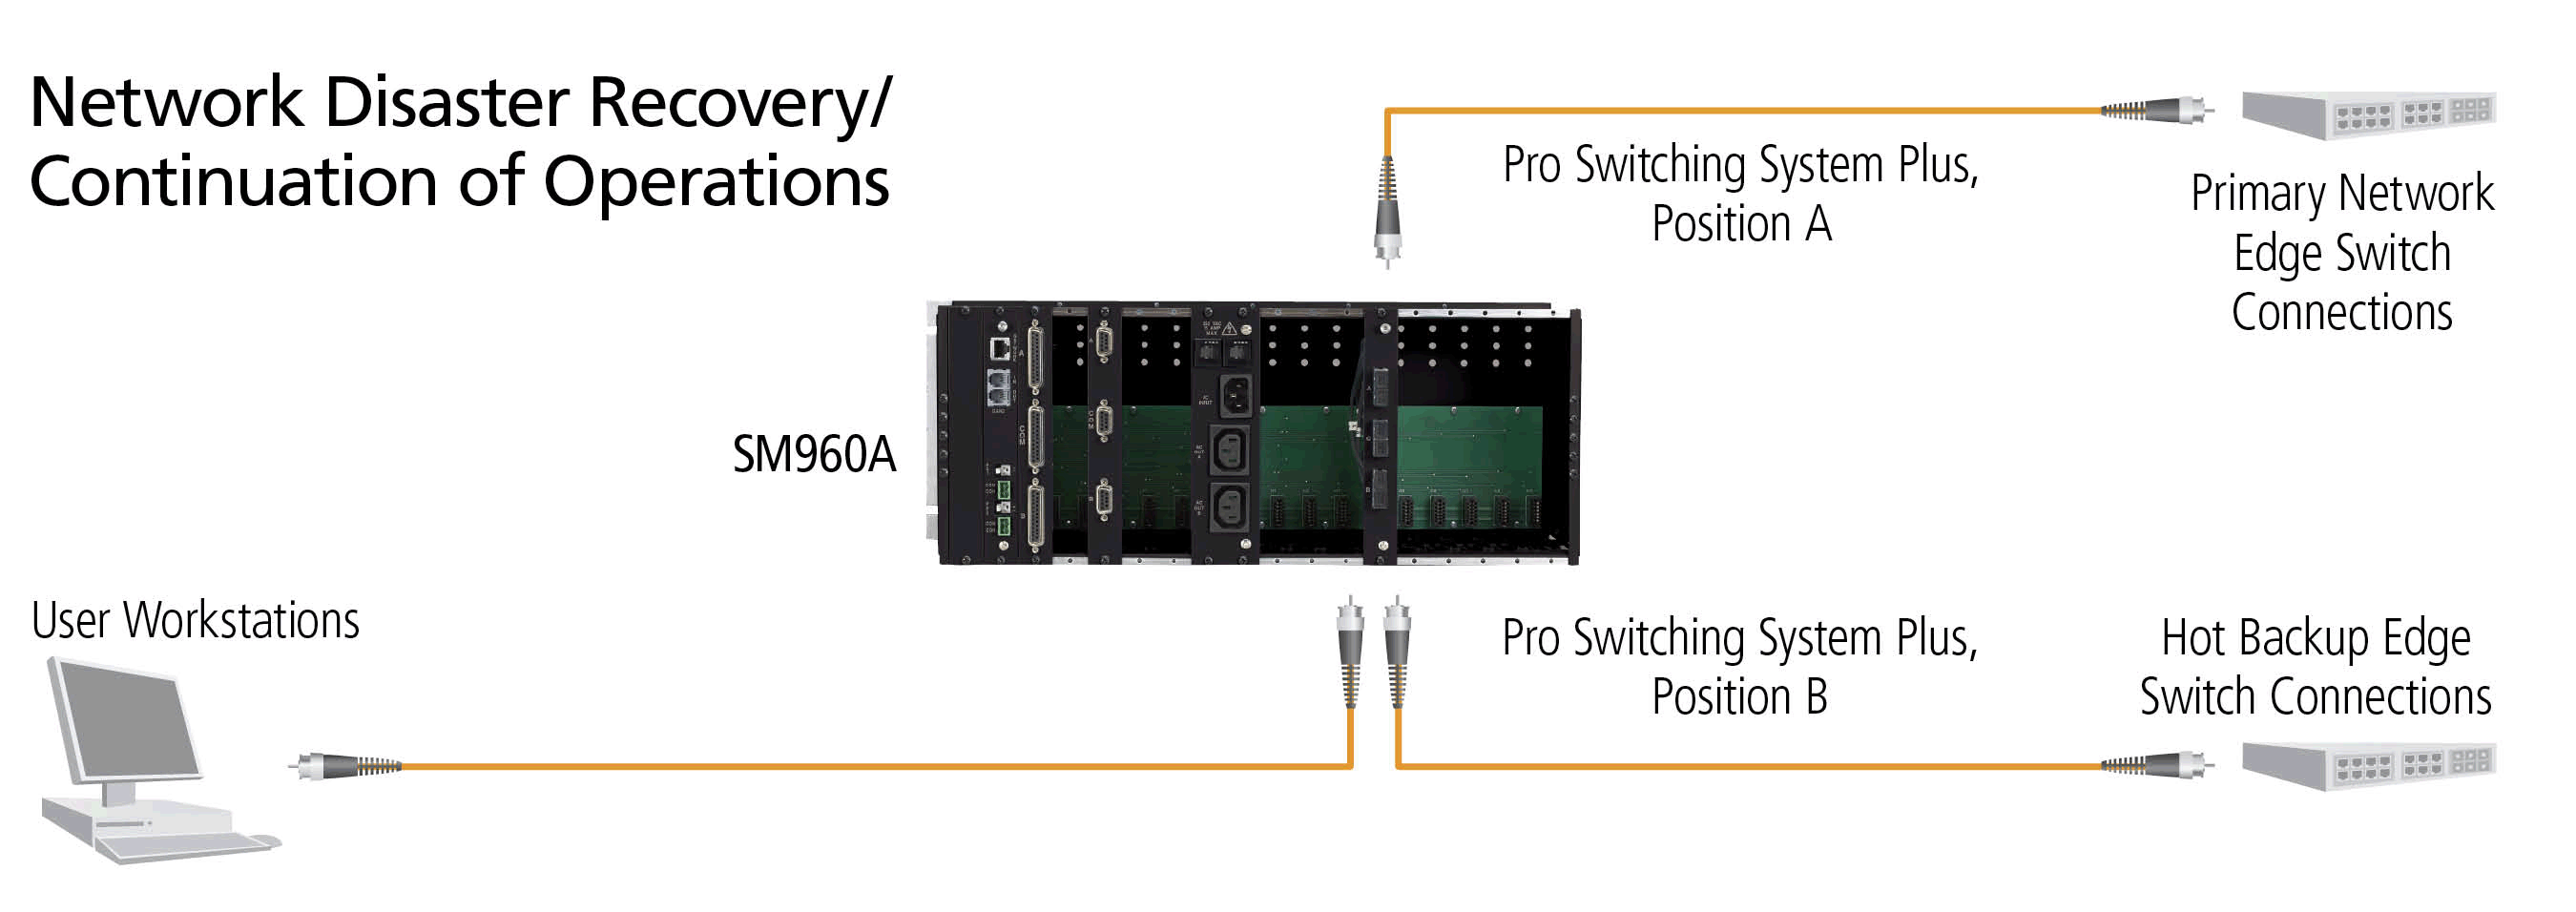 Pro Switching System Plus Application diagram